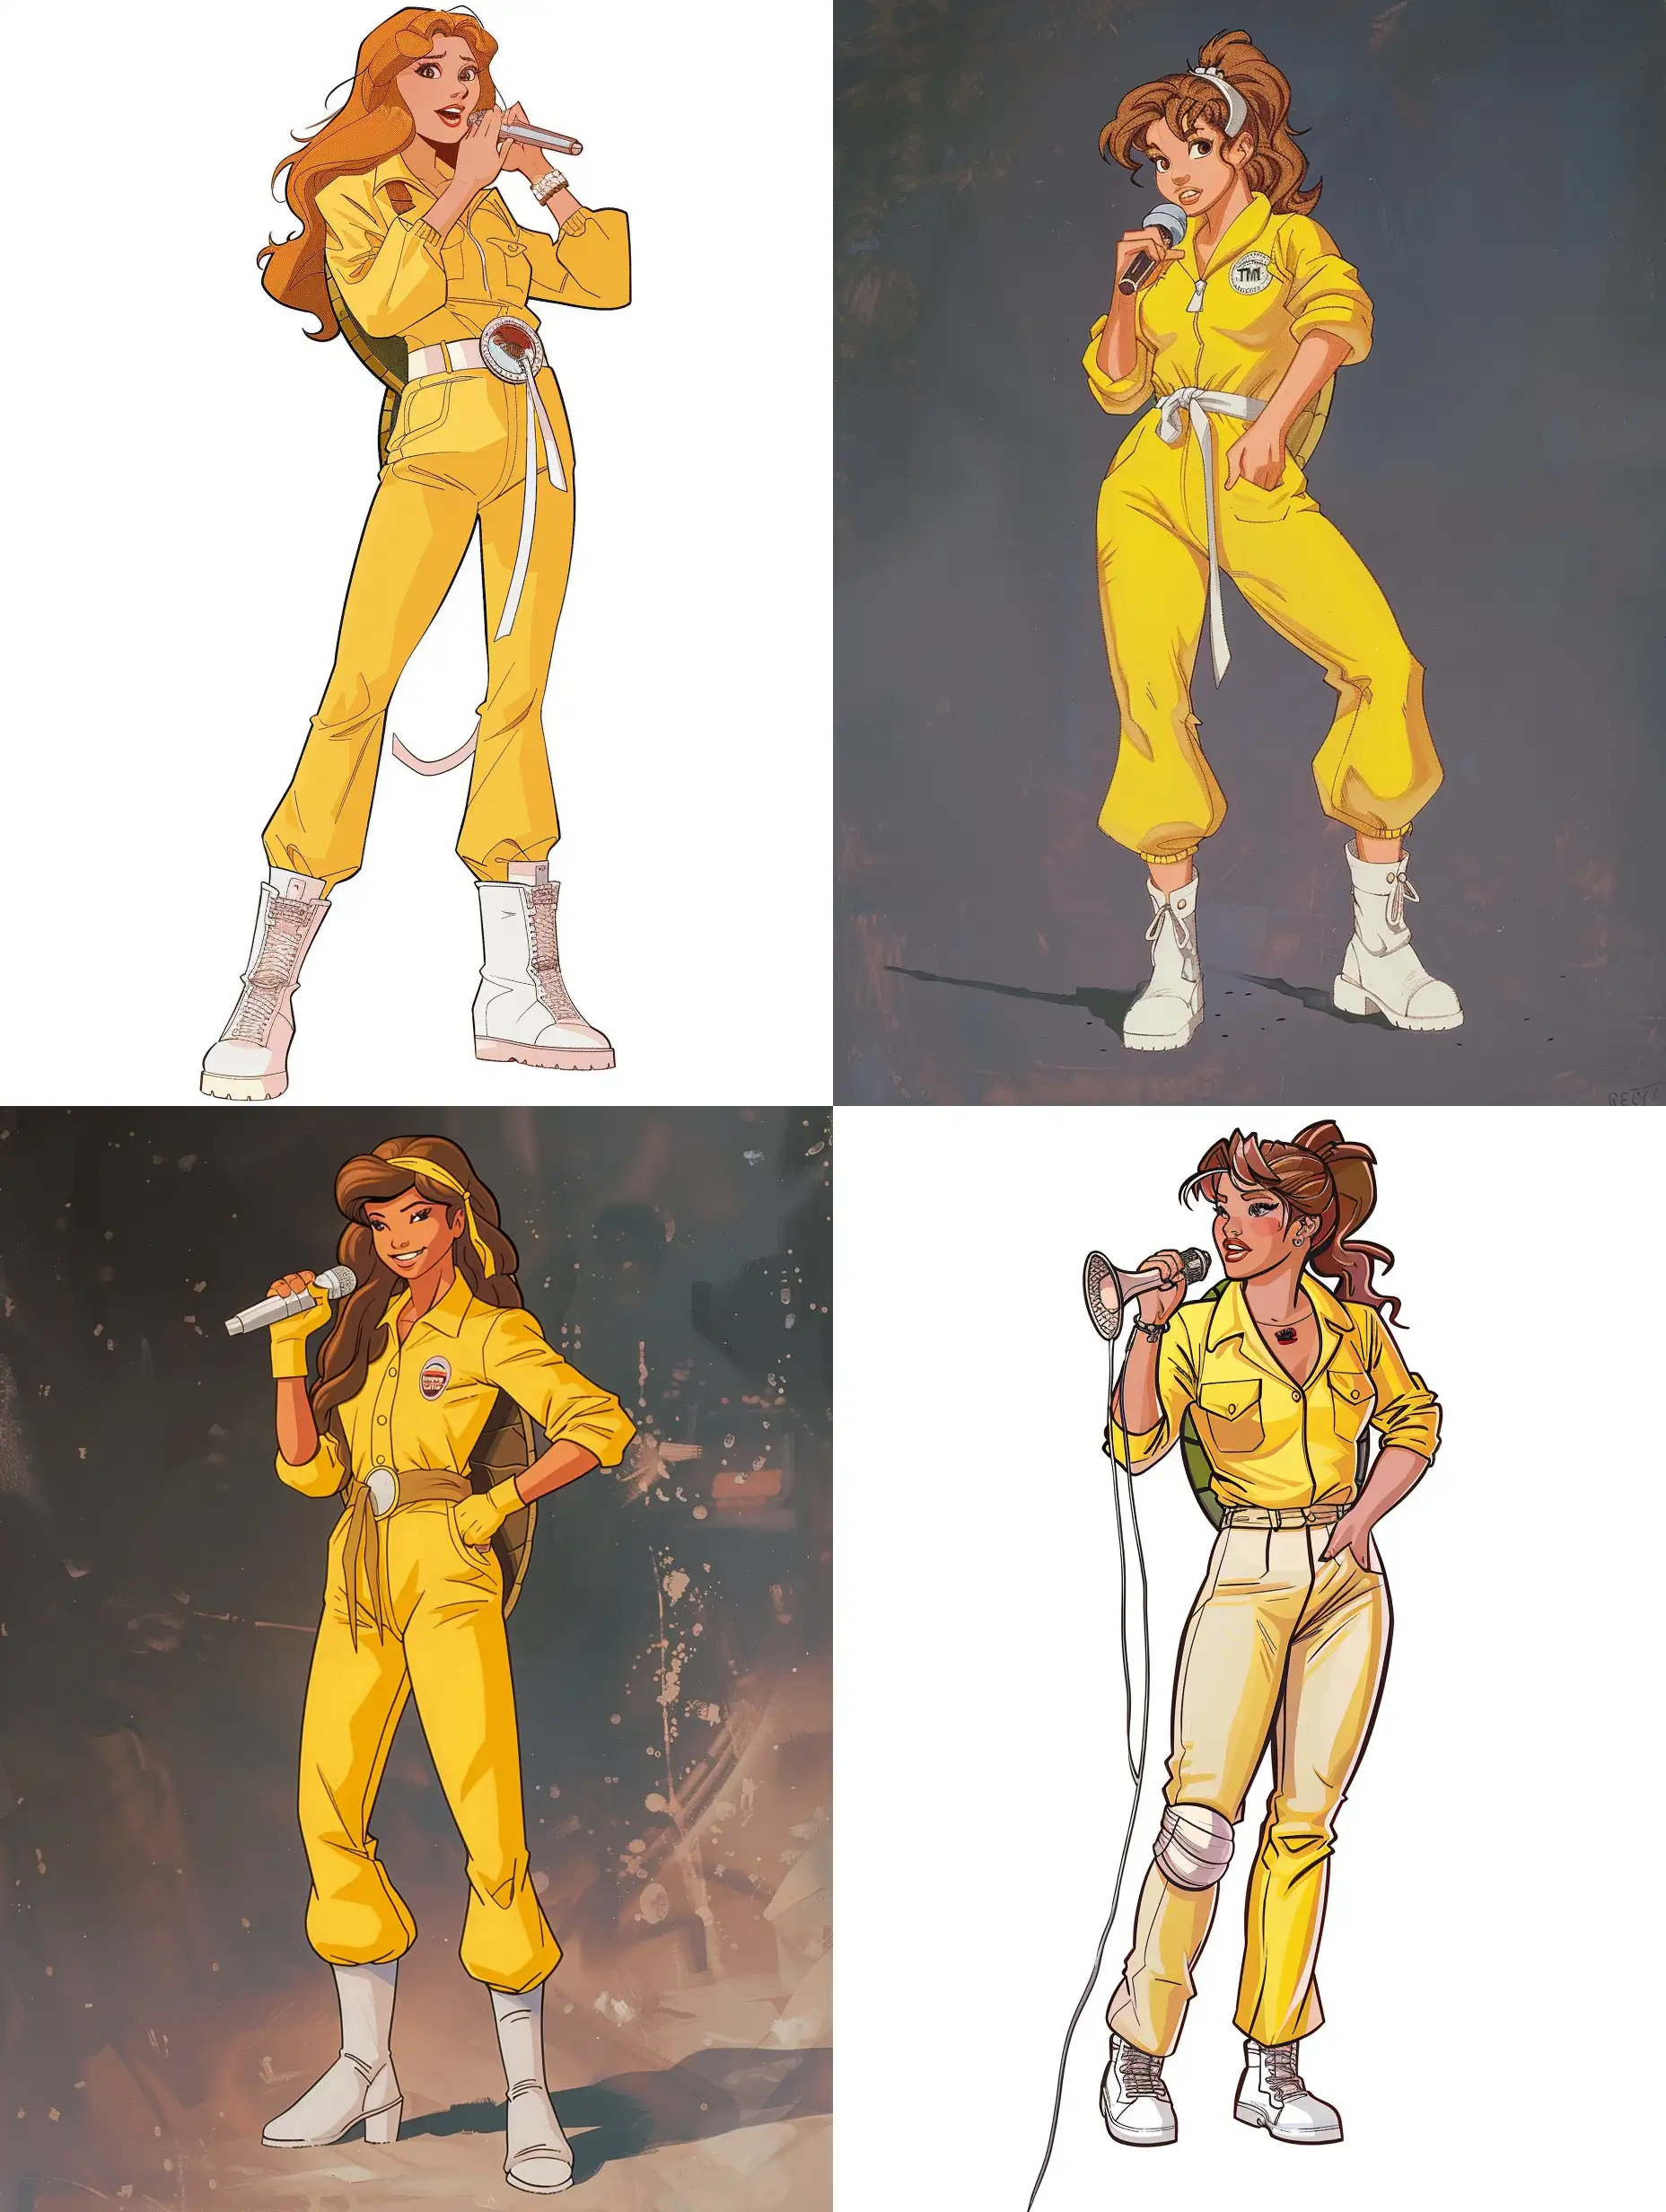 April O’Neil from TMNT 1987 Cartoon, Yellow Jumpsuit, White Boots, Standing with Microphone